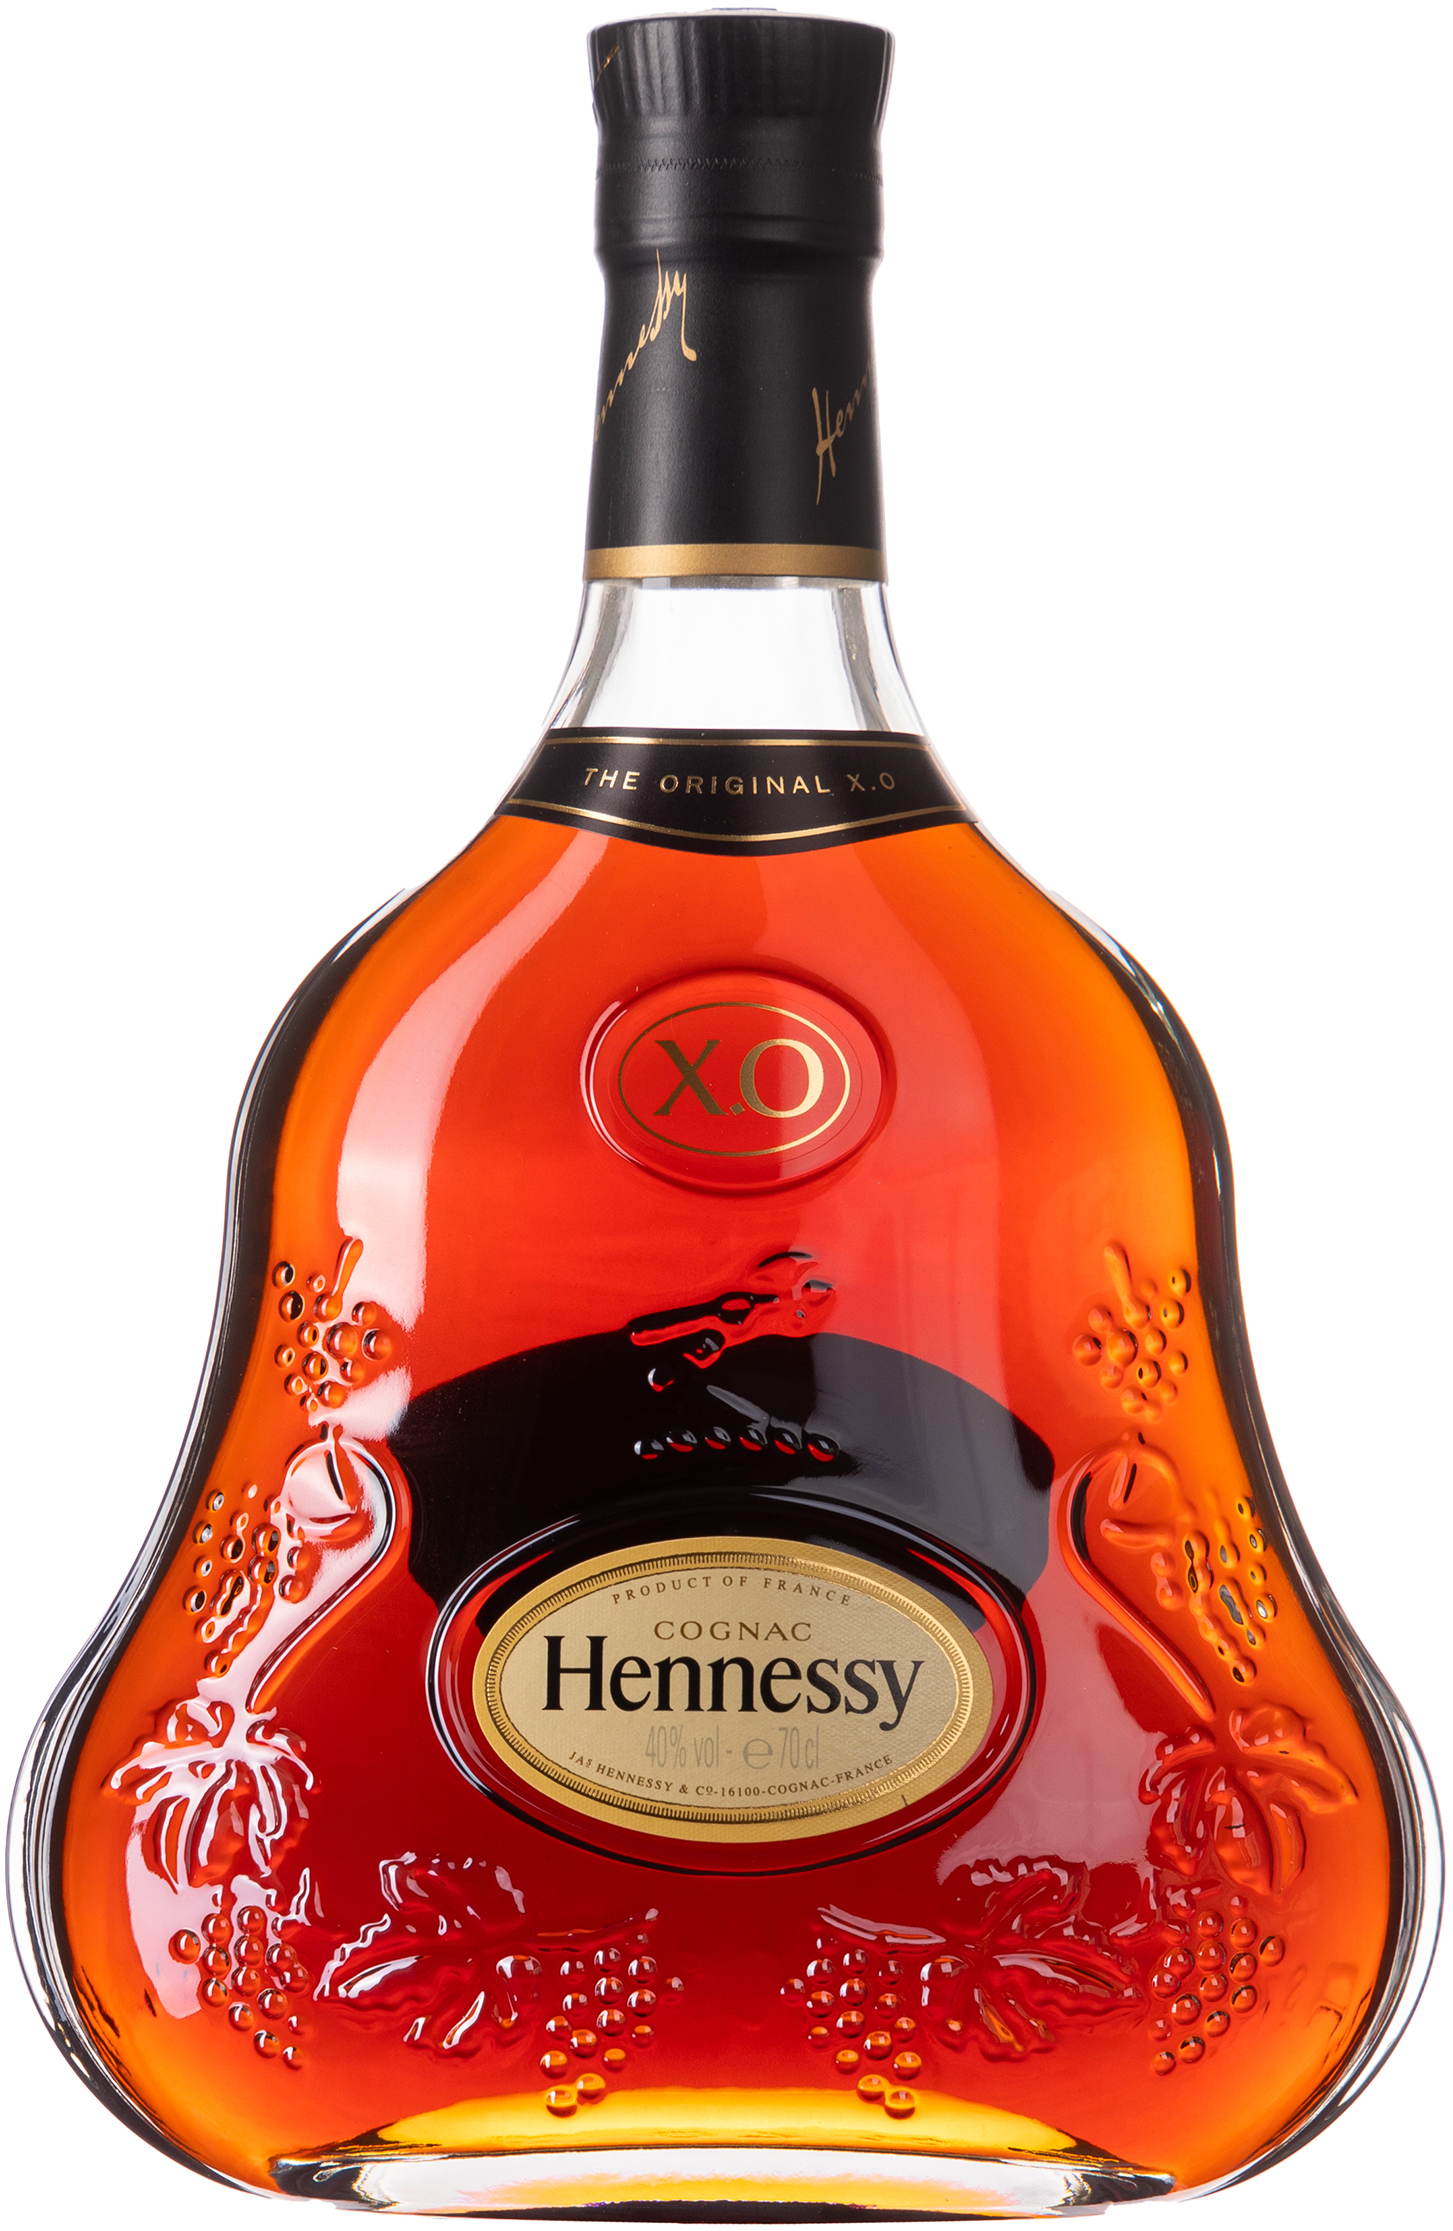 Hennessy X.O Extra Old Cognac 40 % vol. 0,7L